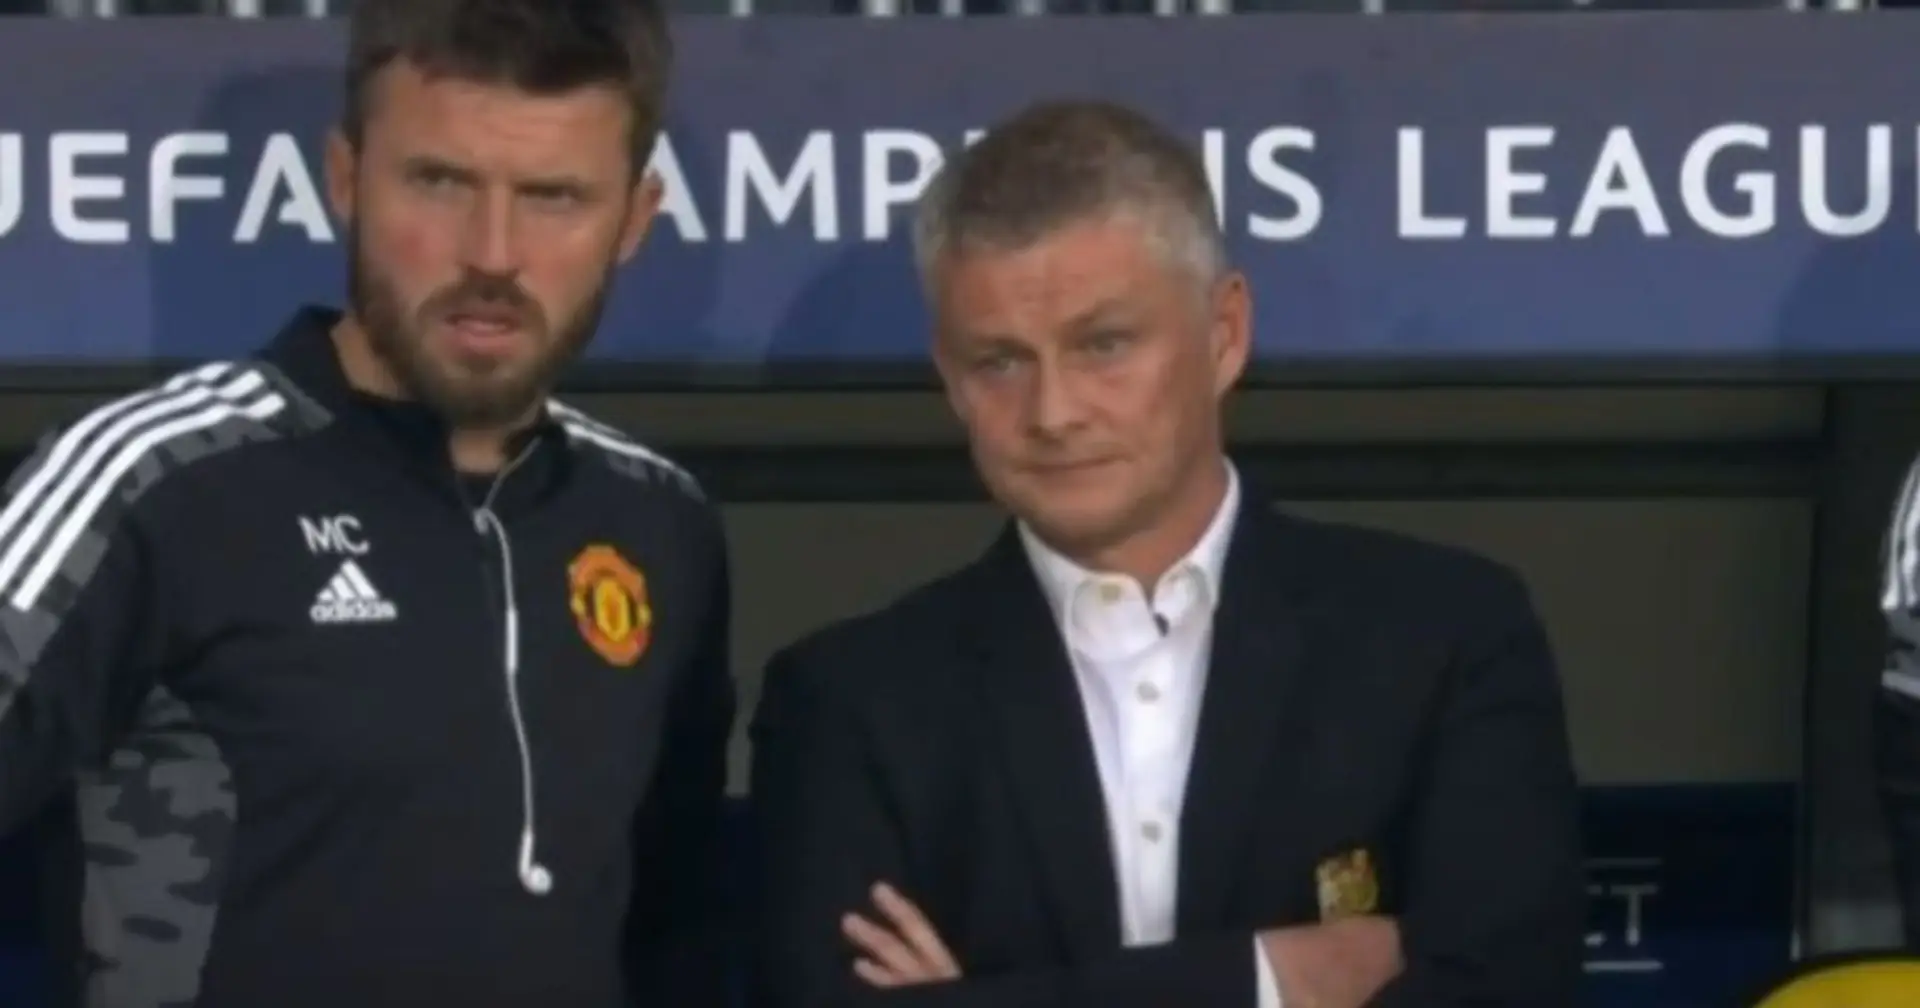 Man United have now lost 4 out of their last 5 Champions League games under Solskjaer